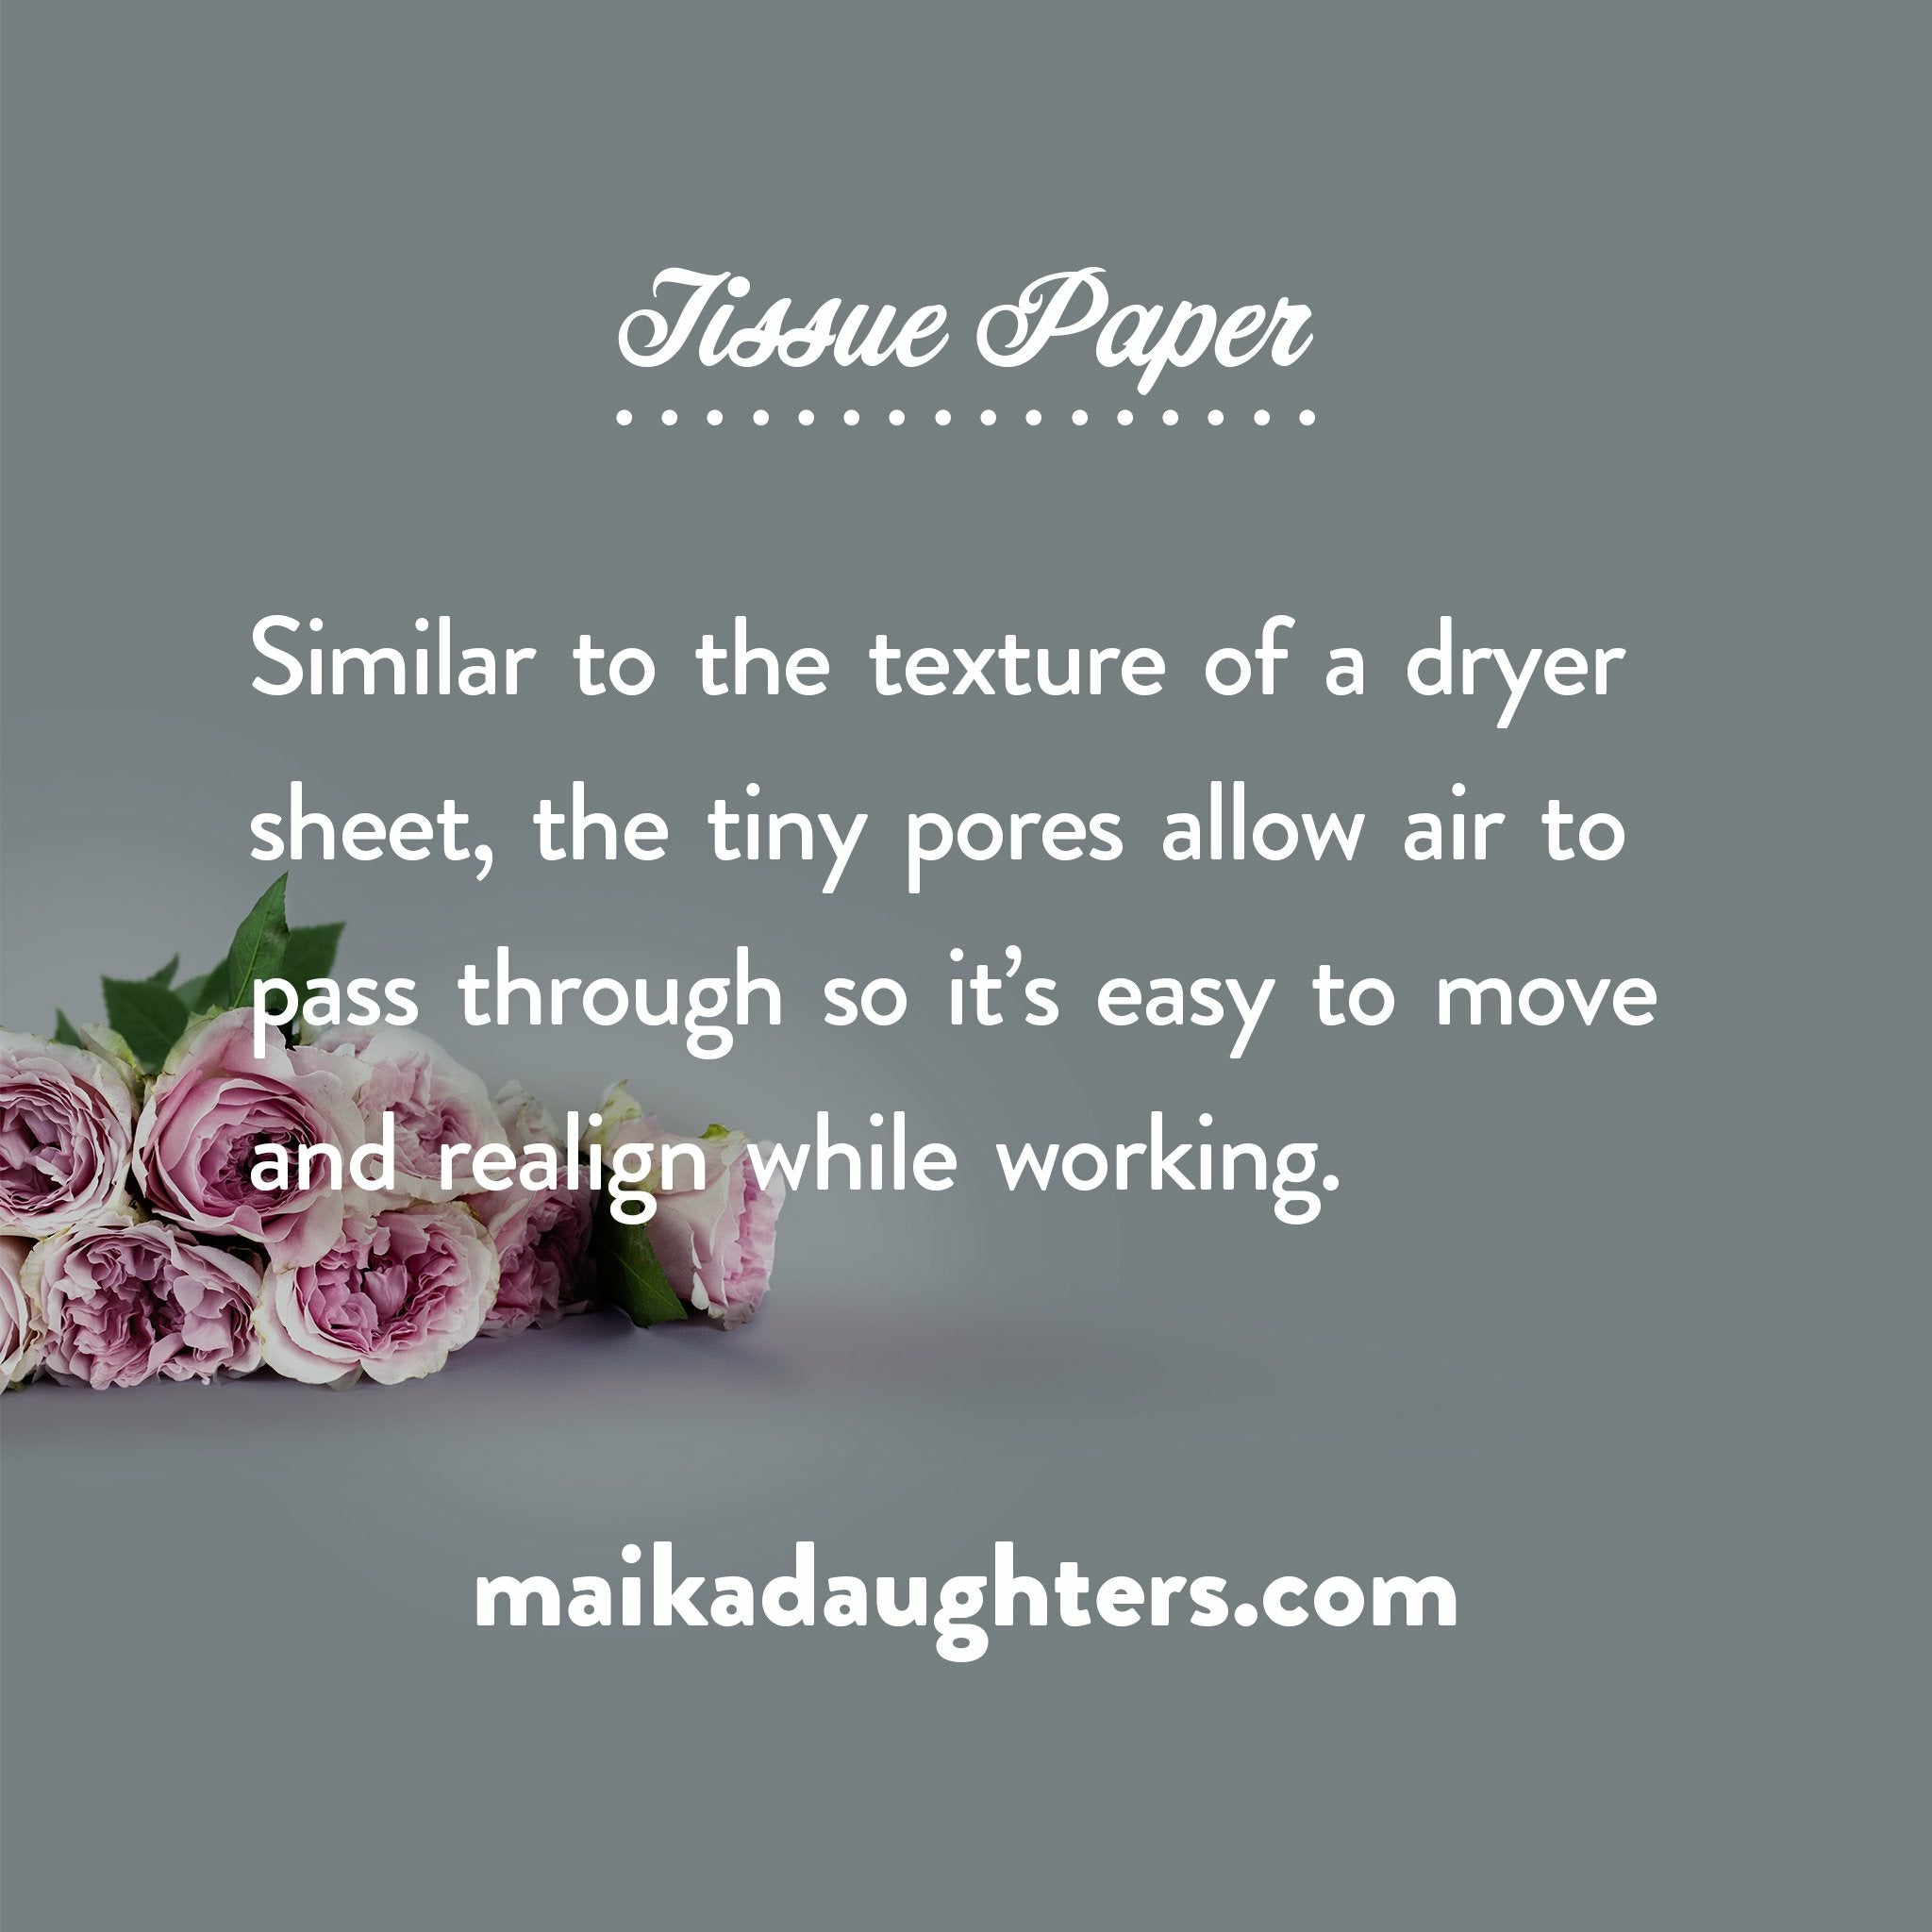 A gray background with a bouquet of roses. White text is shown reading: Tissue paper. Similar to the texture of a dryer sheet, the tiny pores allow air to pass through so it's easy to move and realign while working. Maikadaughters.com